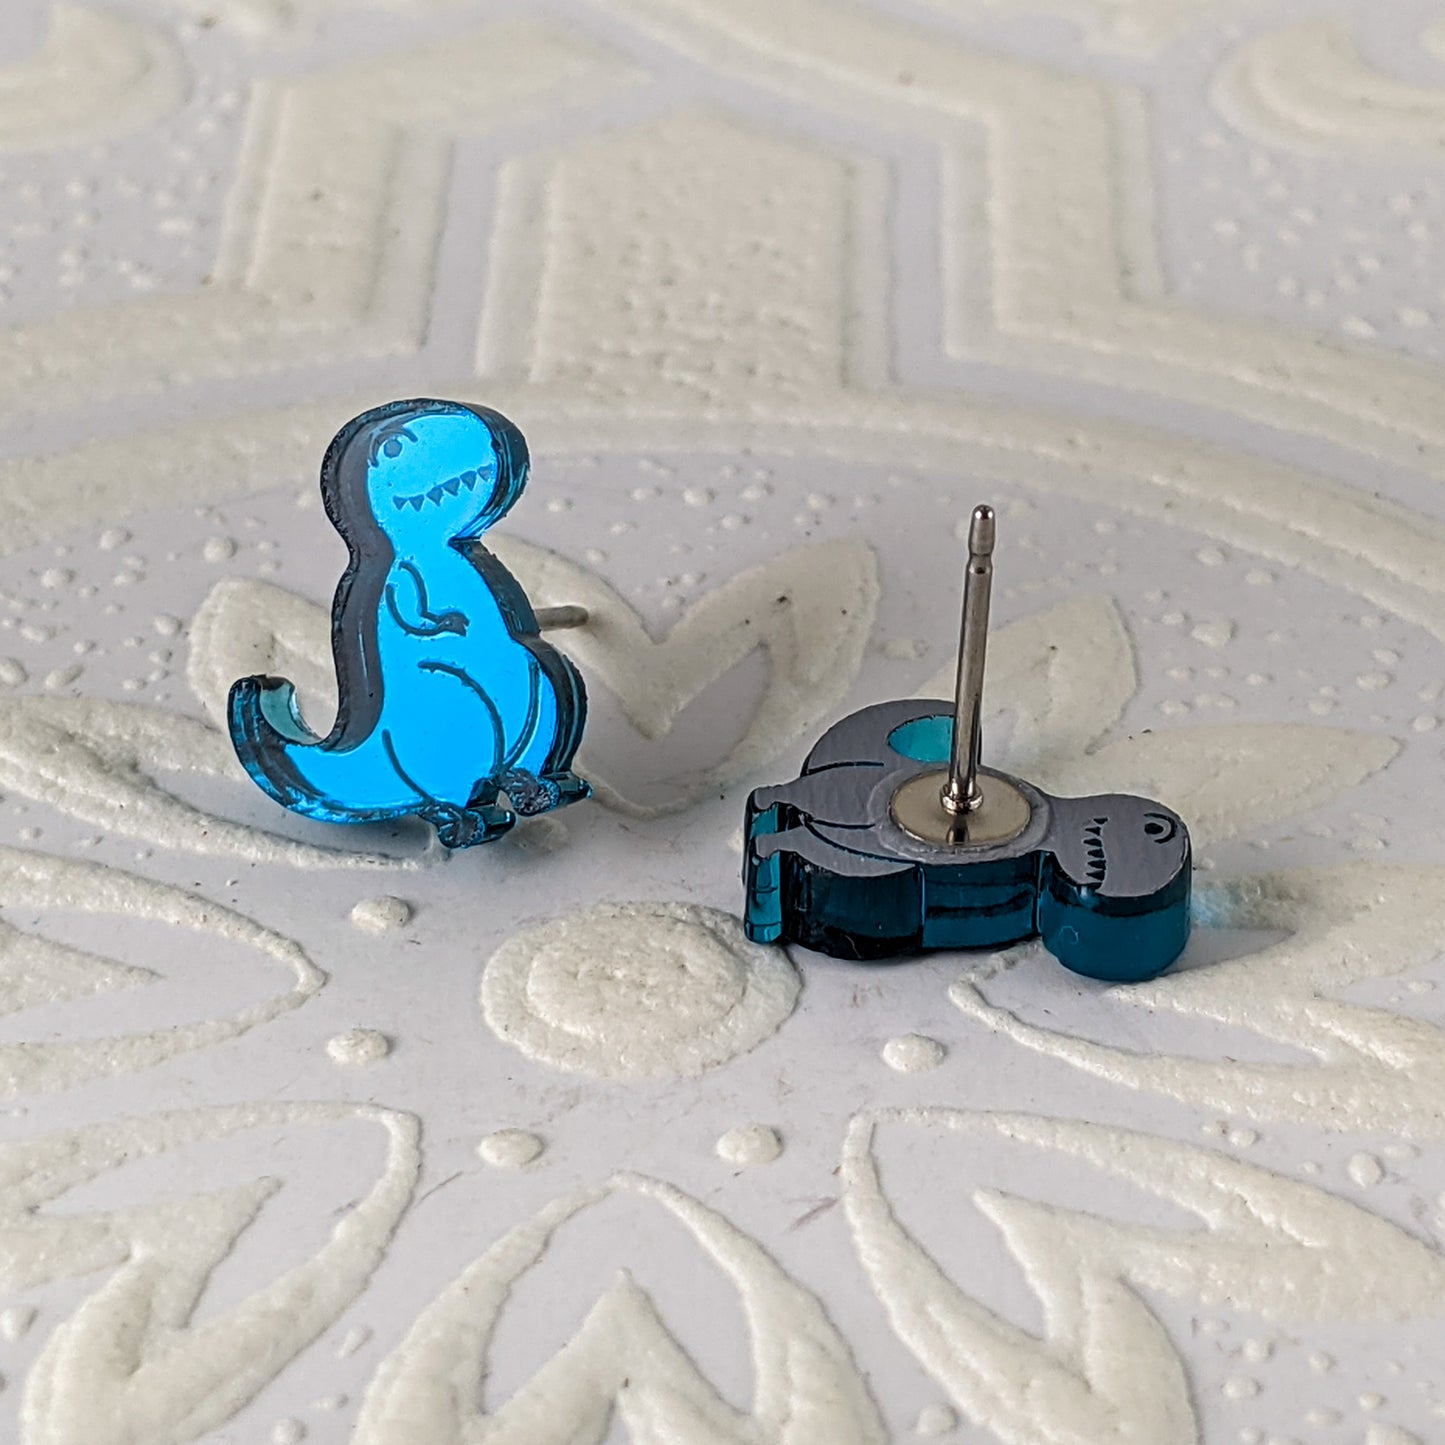 Cartoon Tyrannosaurus Rex stud earrings in teal mirrored acrylic.  One Tres is laying down, showing the stainless steel earring post.  By Isette.